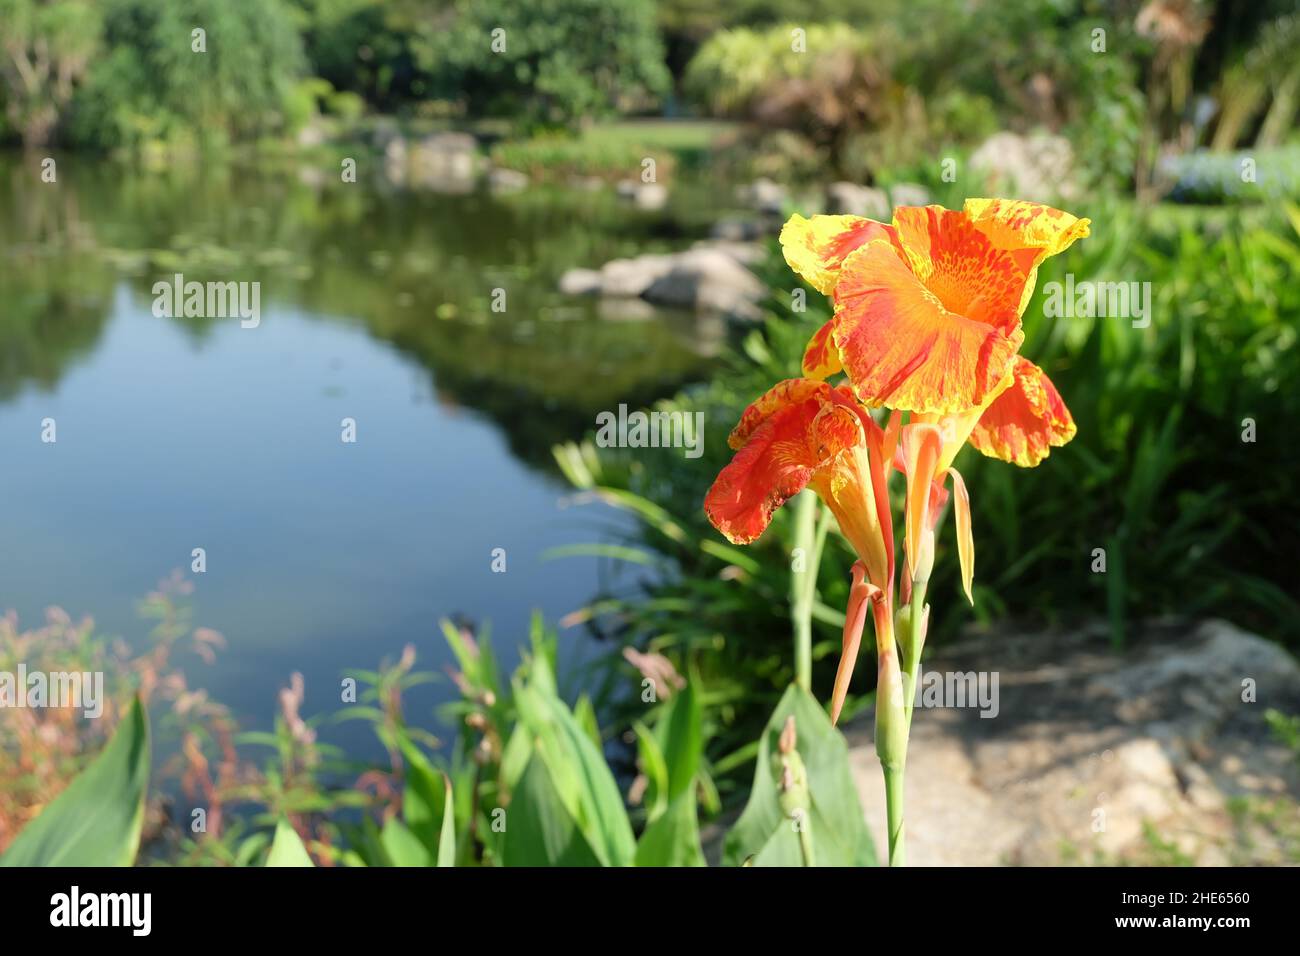 Flower and Plant, Fresh Orange Canna Lily Flowers Decoration in A Green Garden. Stock Photo